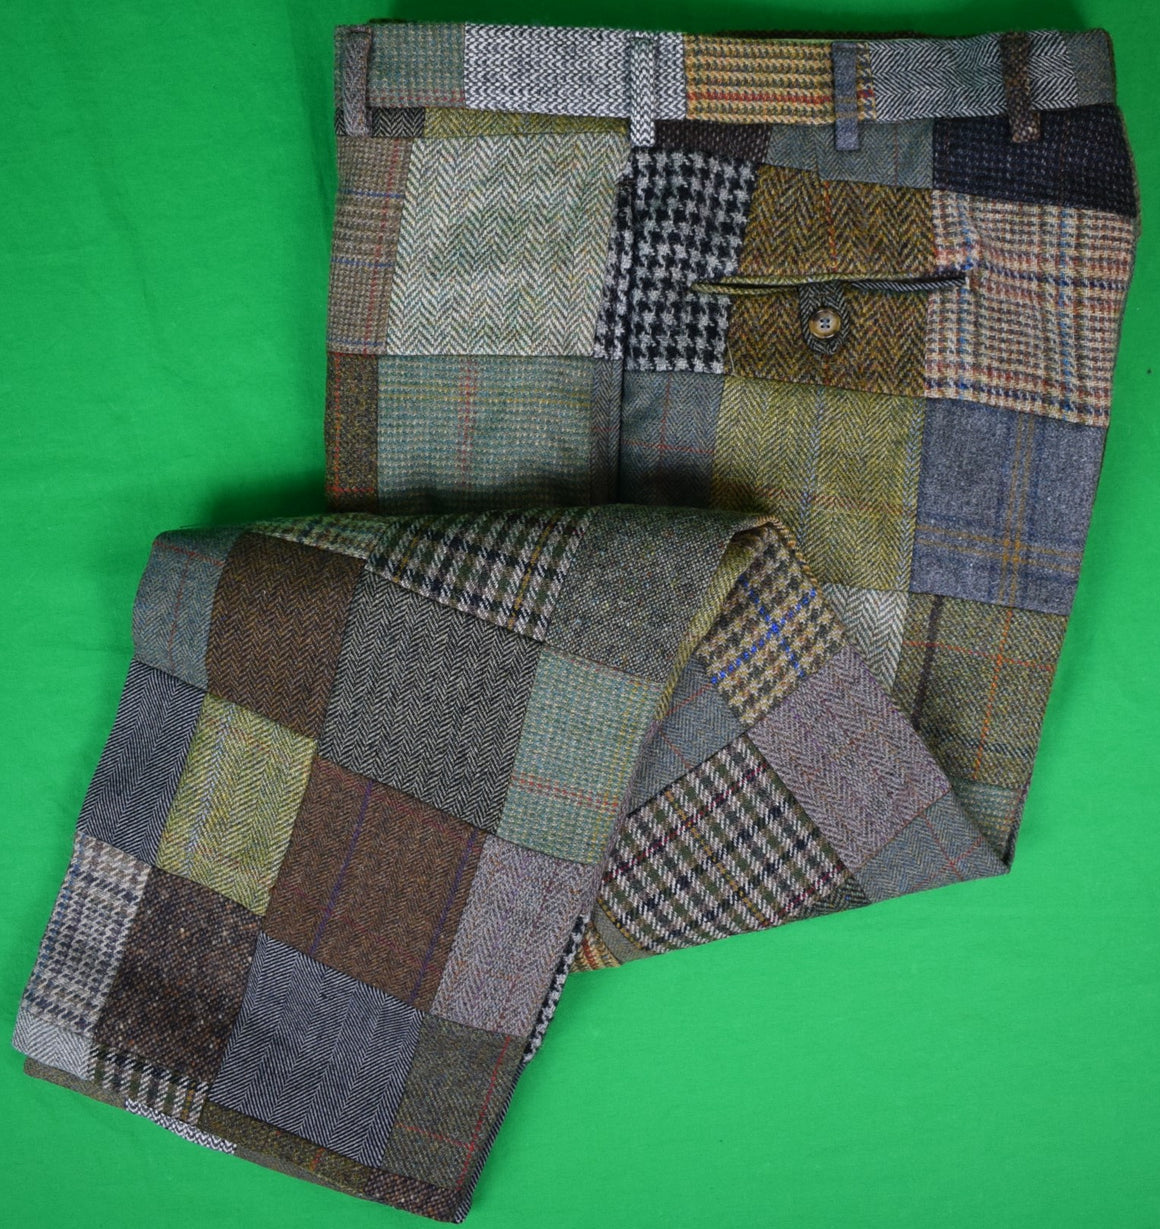 "The Andover Shop Patch Tweed Trousers" Sz 35